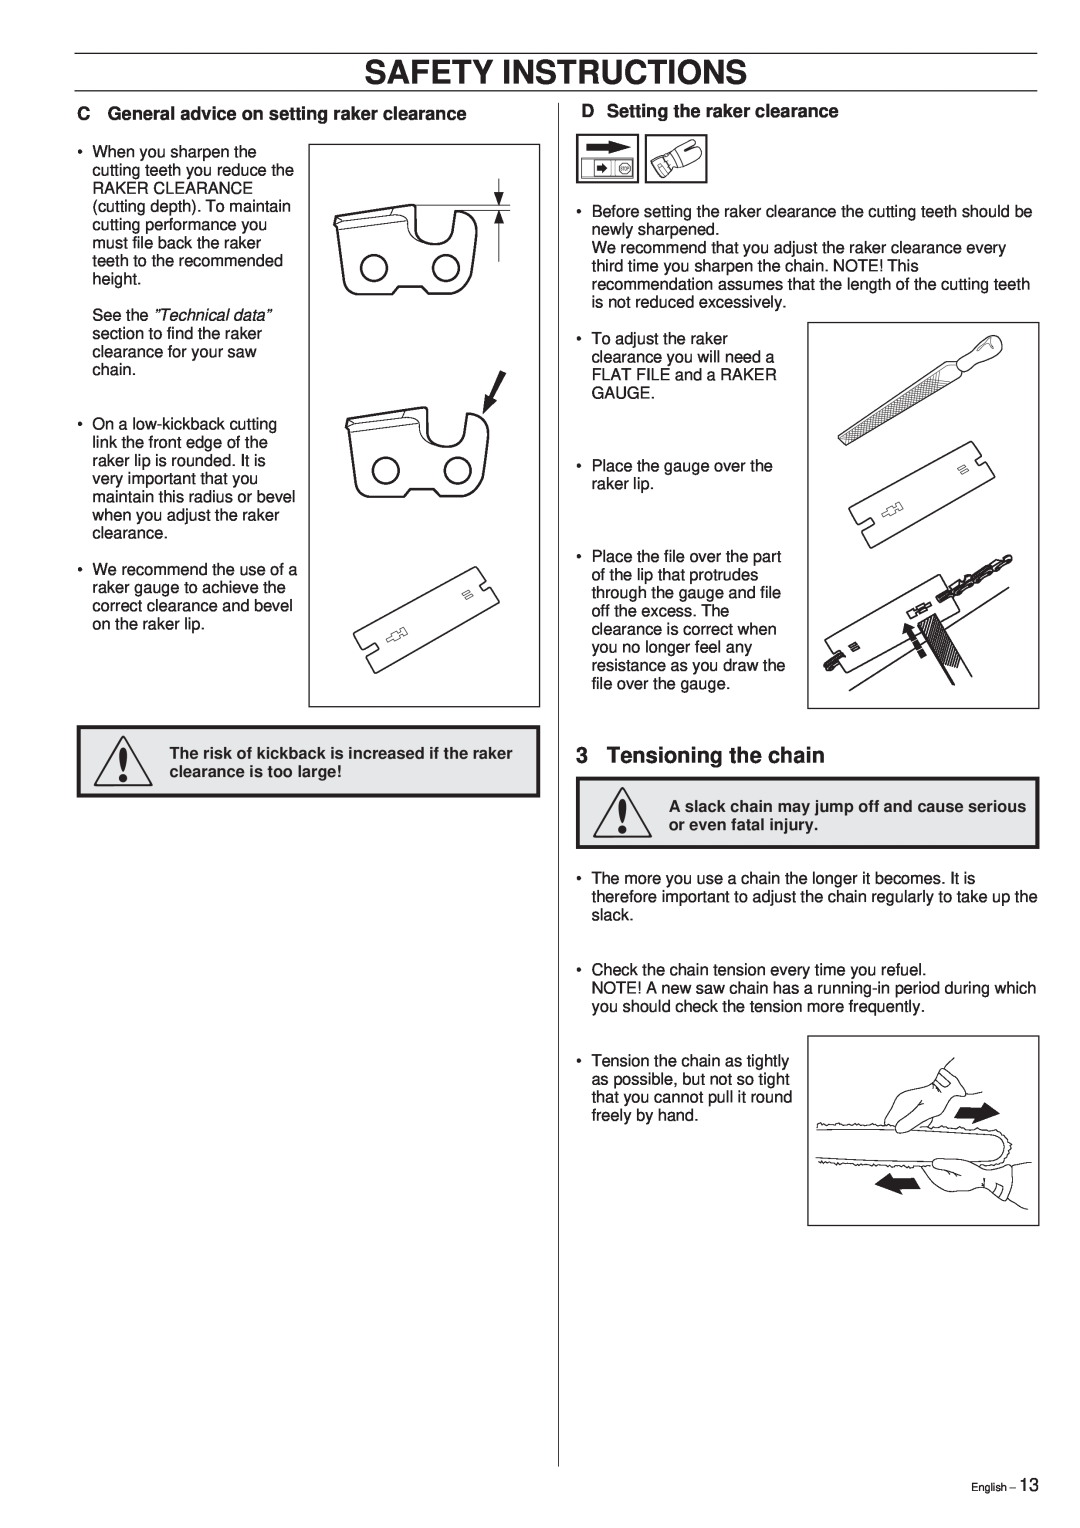 Husqvarna 40 manual 3Tensioning the chain, Safety Instructions, C General advice on setting raker clearance 